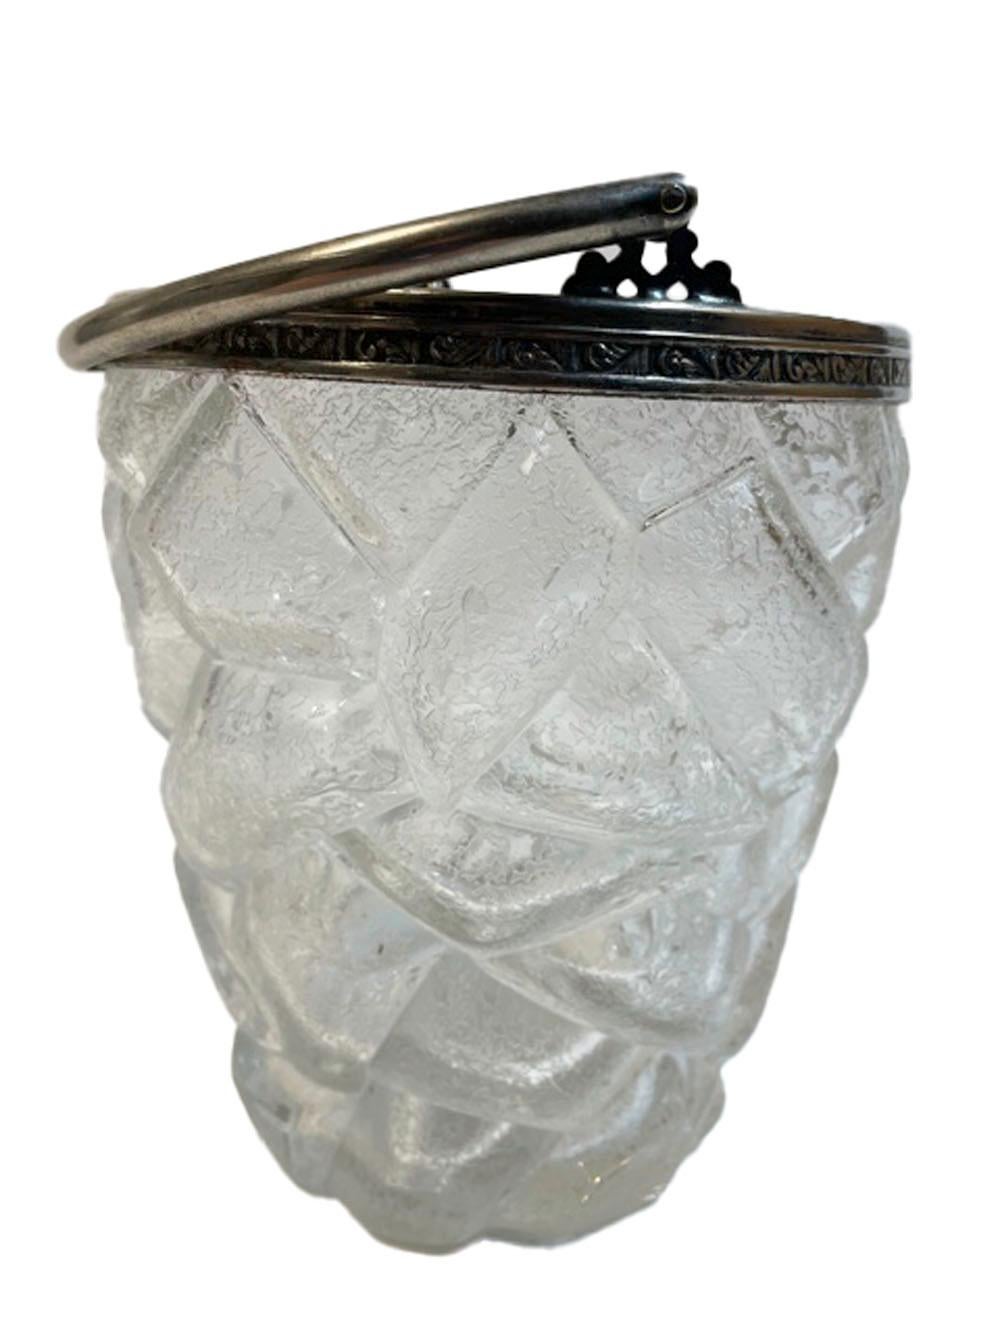 American Art Deco Cracked Ice Molded Ice Bucket with Silver Plate Rim and Handle For Sale